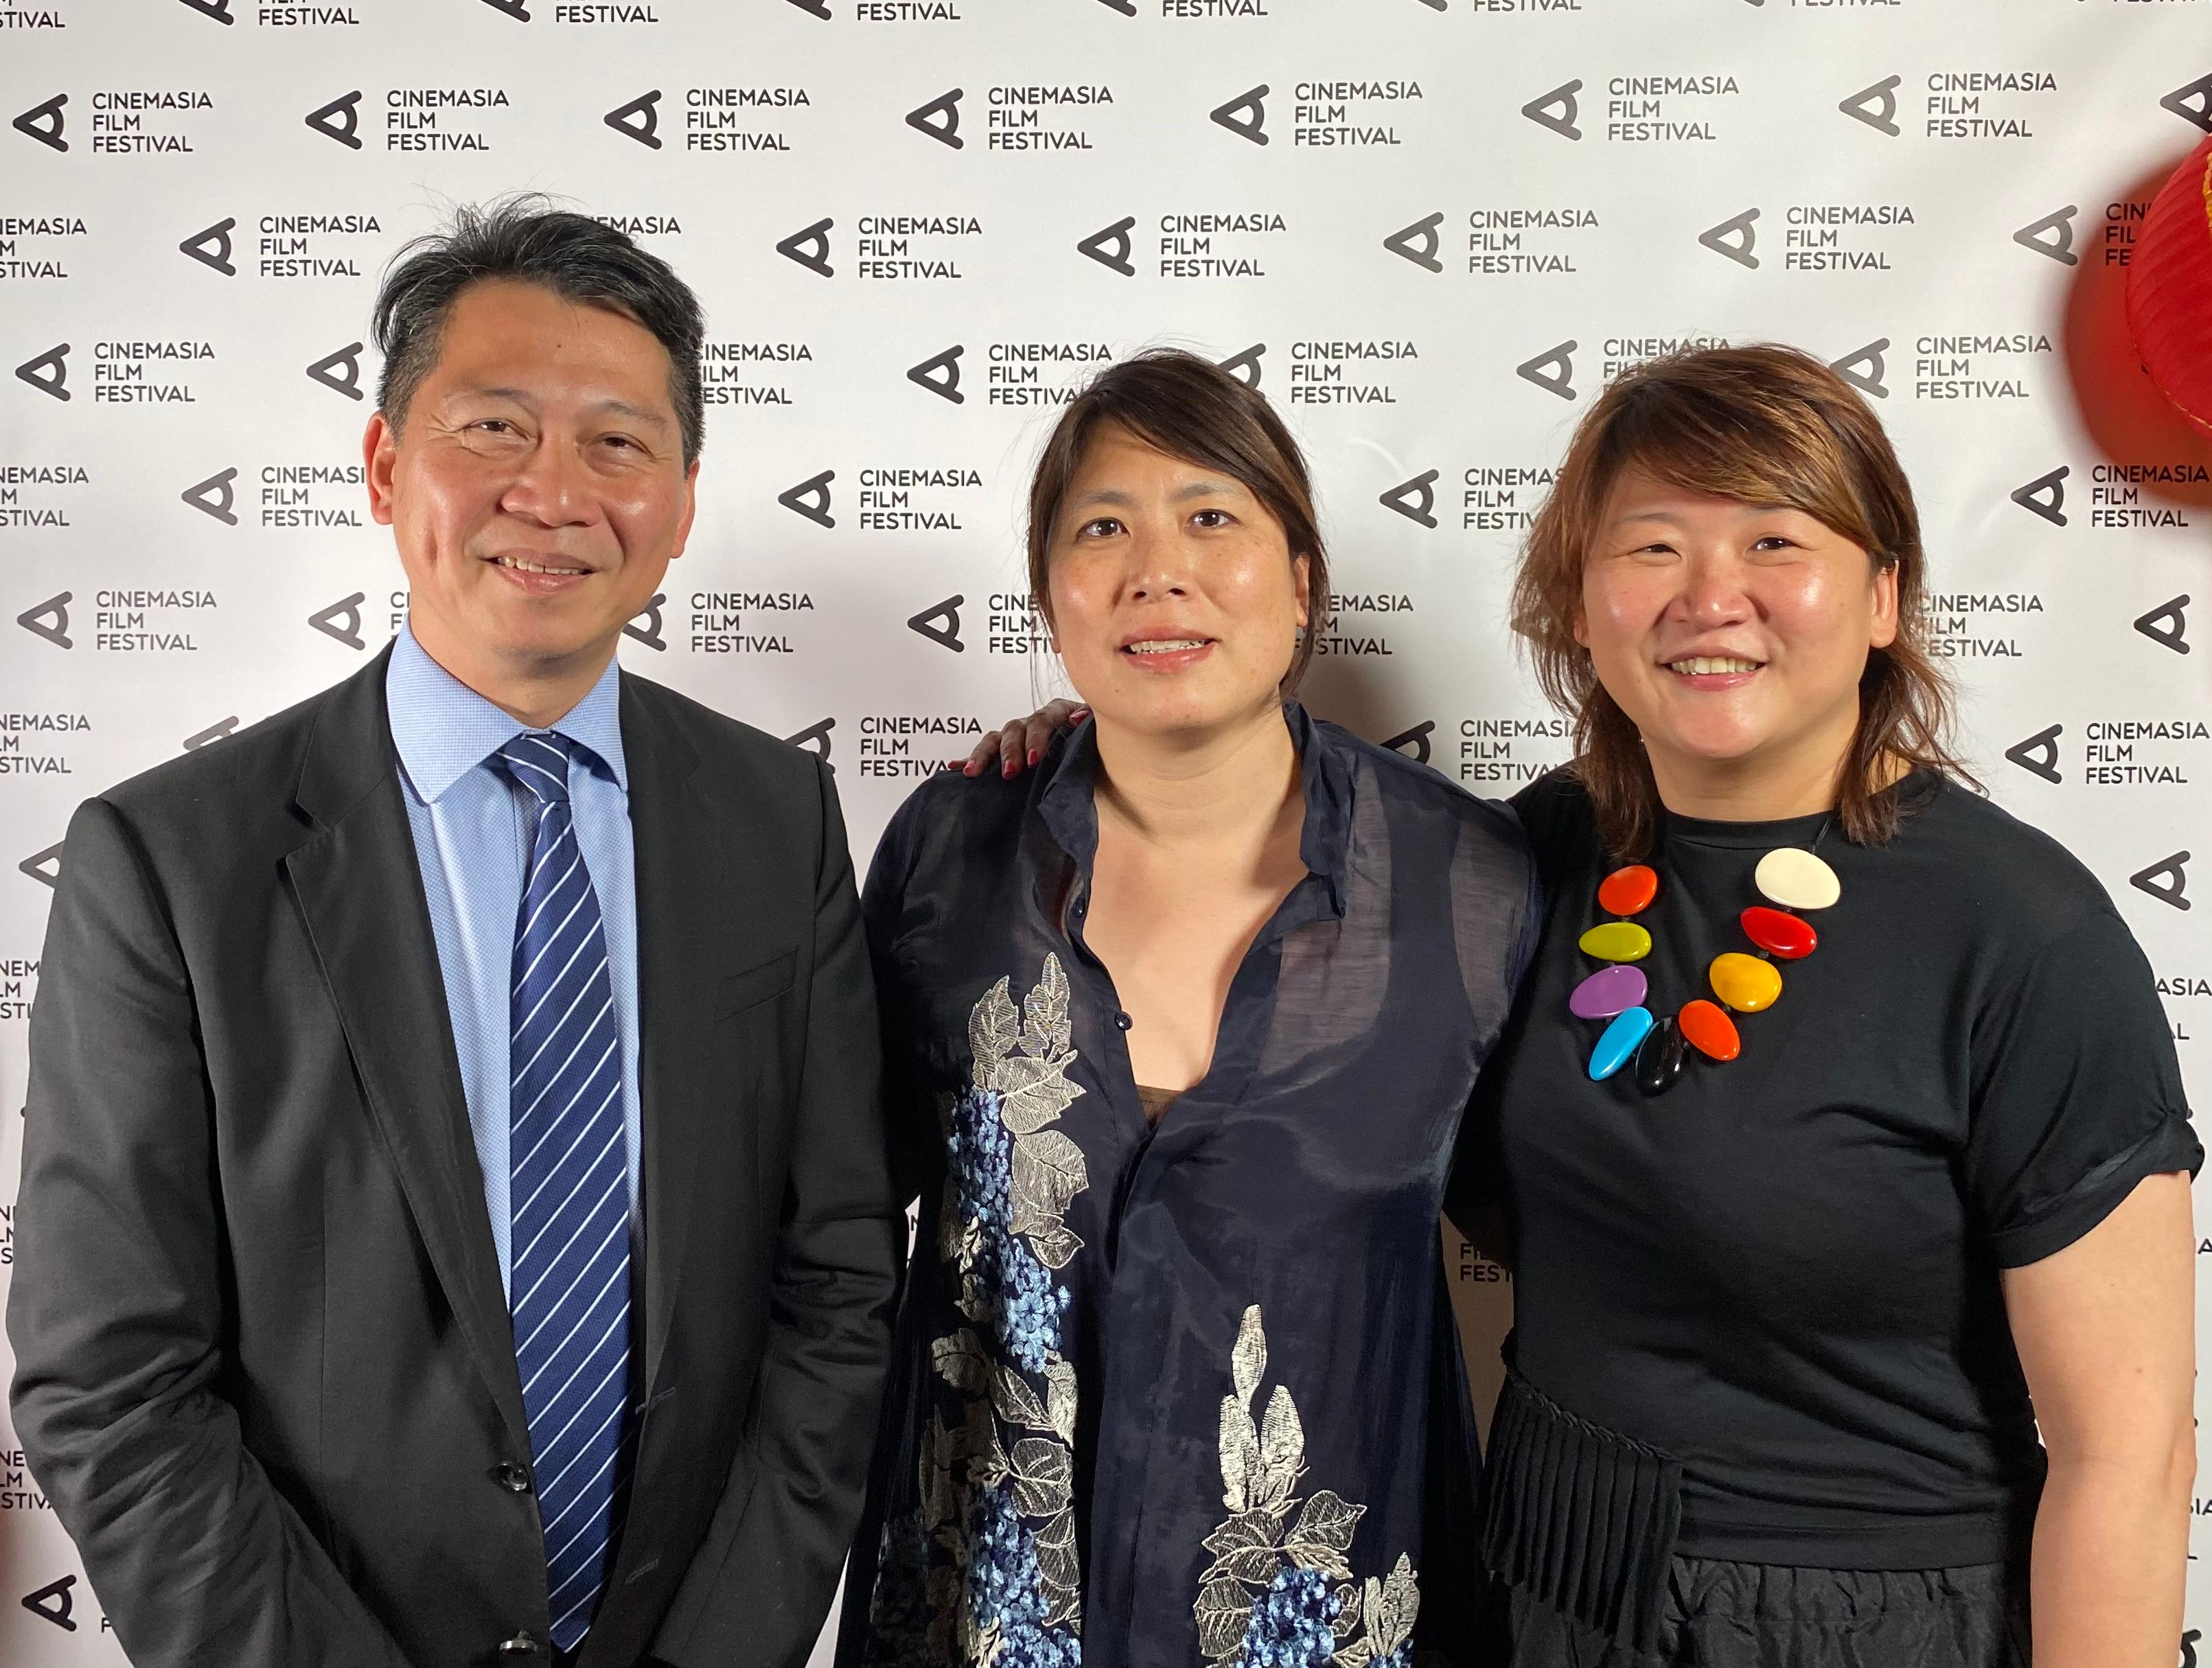 The Special Representative for Hong Kong Economic and Trade Affairs to the European Union, Mr Eddie Cheung (left), attended the networking reception at the 14th CinemAsia Film Festival in Amsterdam, the Netherlands, on May 10 (Amsterdam time). The Founder and Head of the Board of the Film Festival, Ms Doris Yeung (centre), also attended.